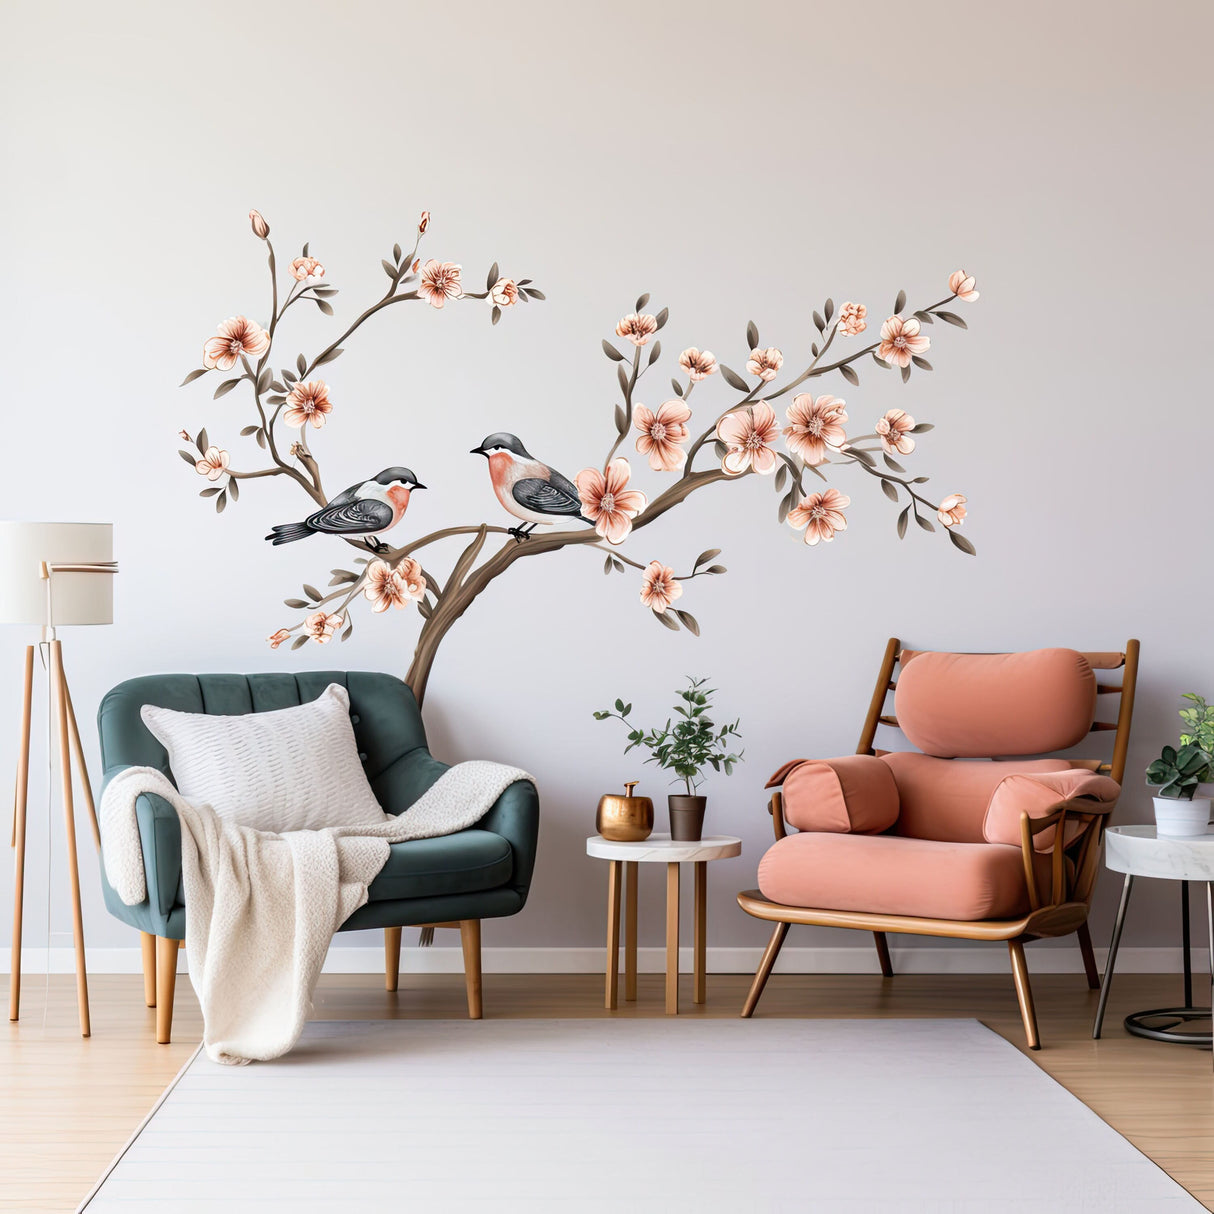 Tree with Blossom Flowers and Birds Wall Sticker - Elegant Vinyl Decor for Living Room